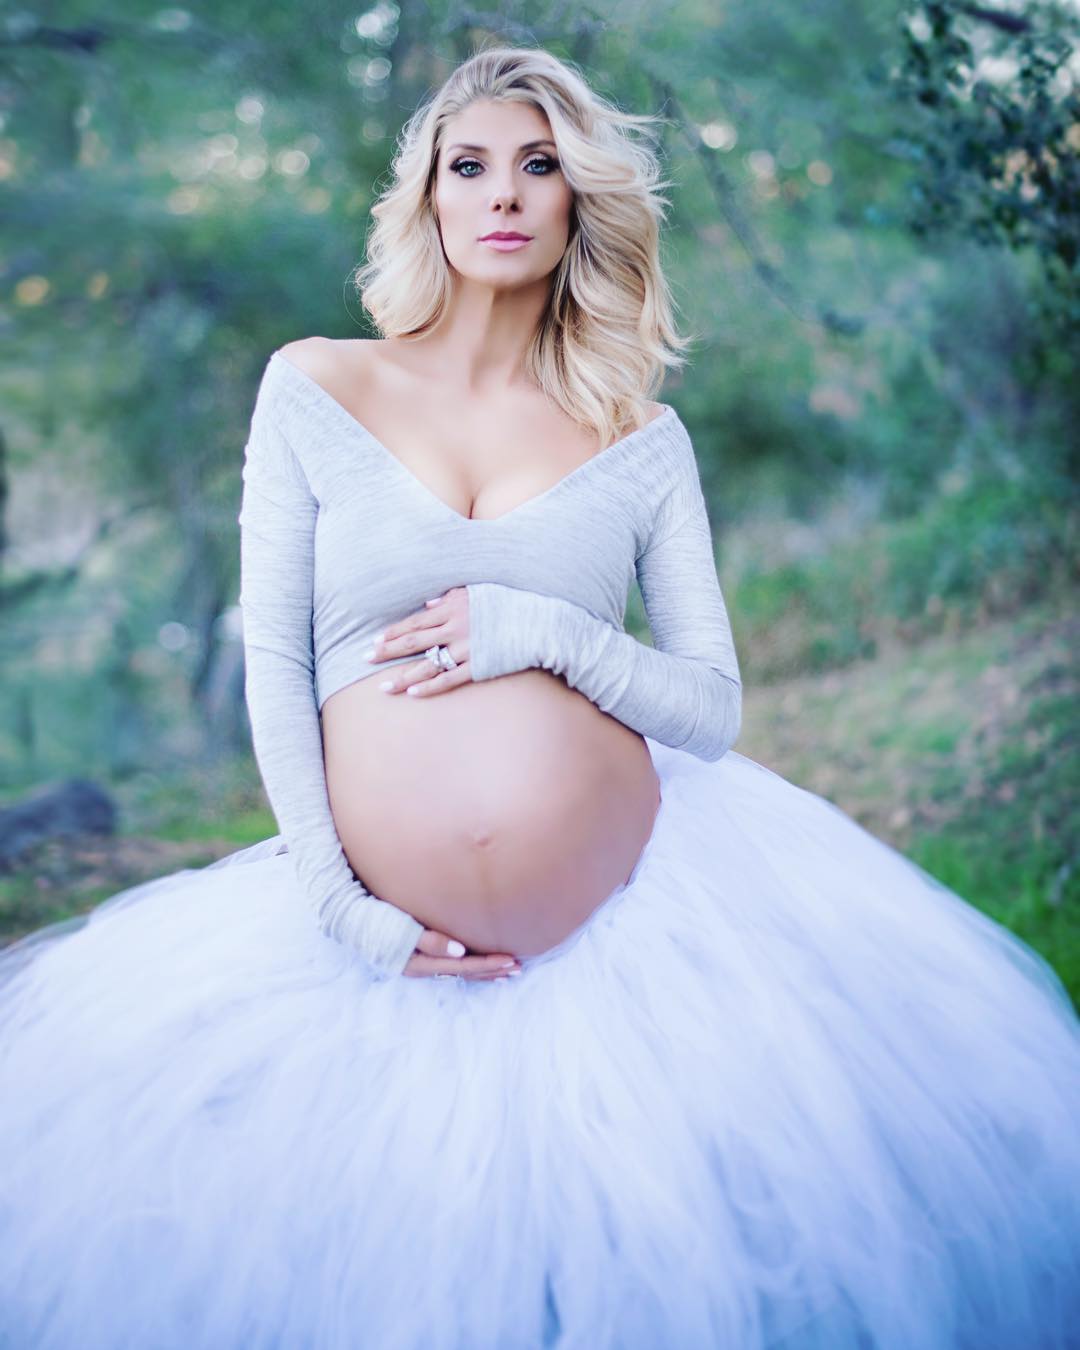 Michelle Beisner flaunting her baby bump.